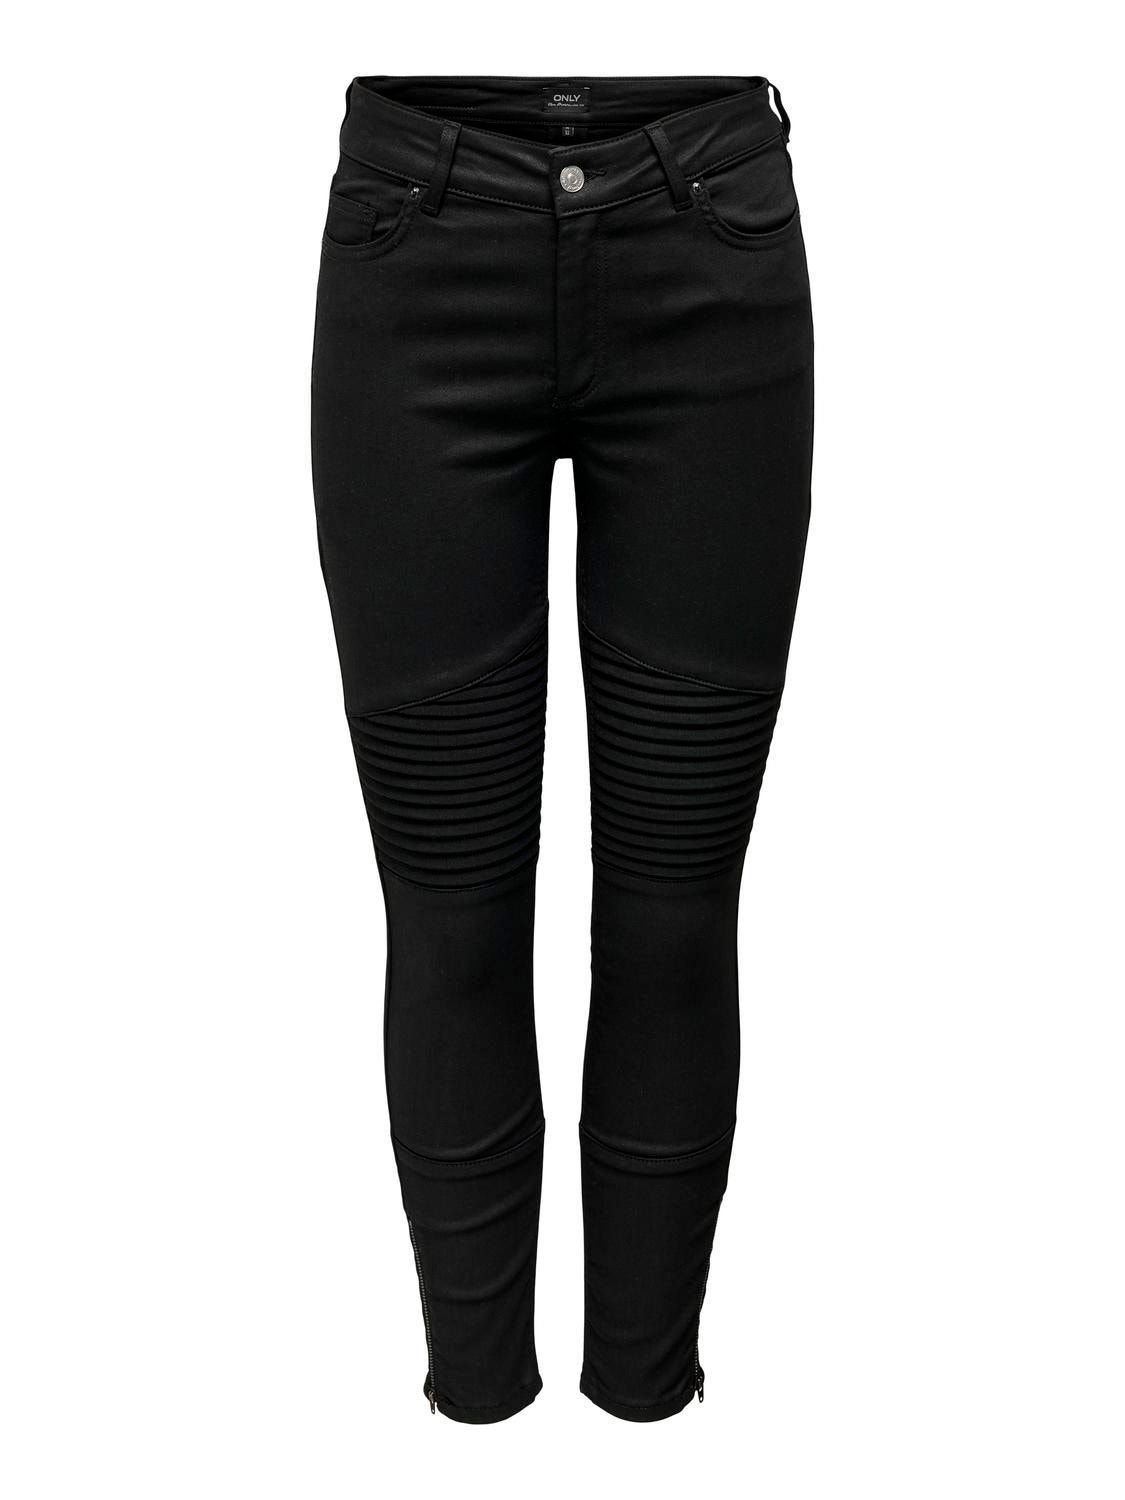 ONLY Skinny fit Mid waist Jeans -Black - 15281319